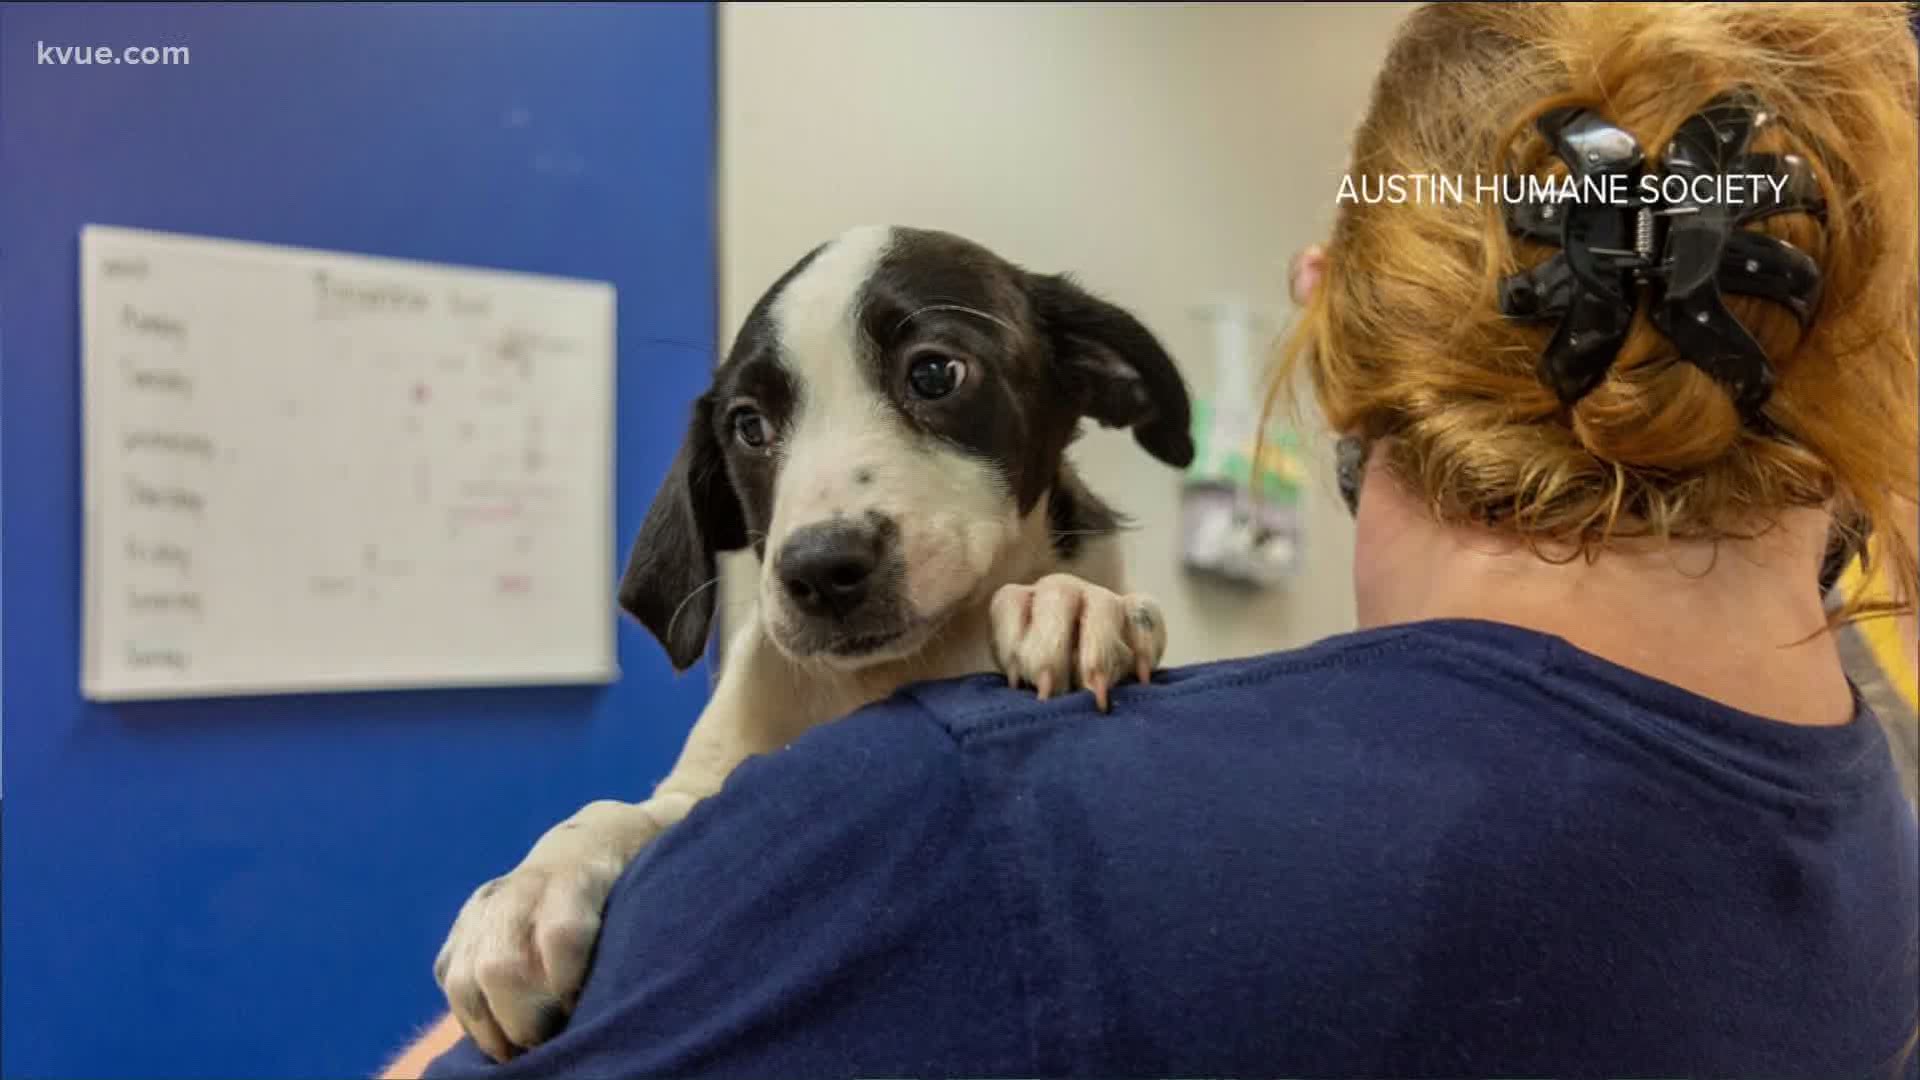 The Austin Humane Society is preparing to take in nearly 200 animals from shelters near the Texas coast.